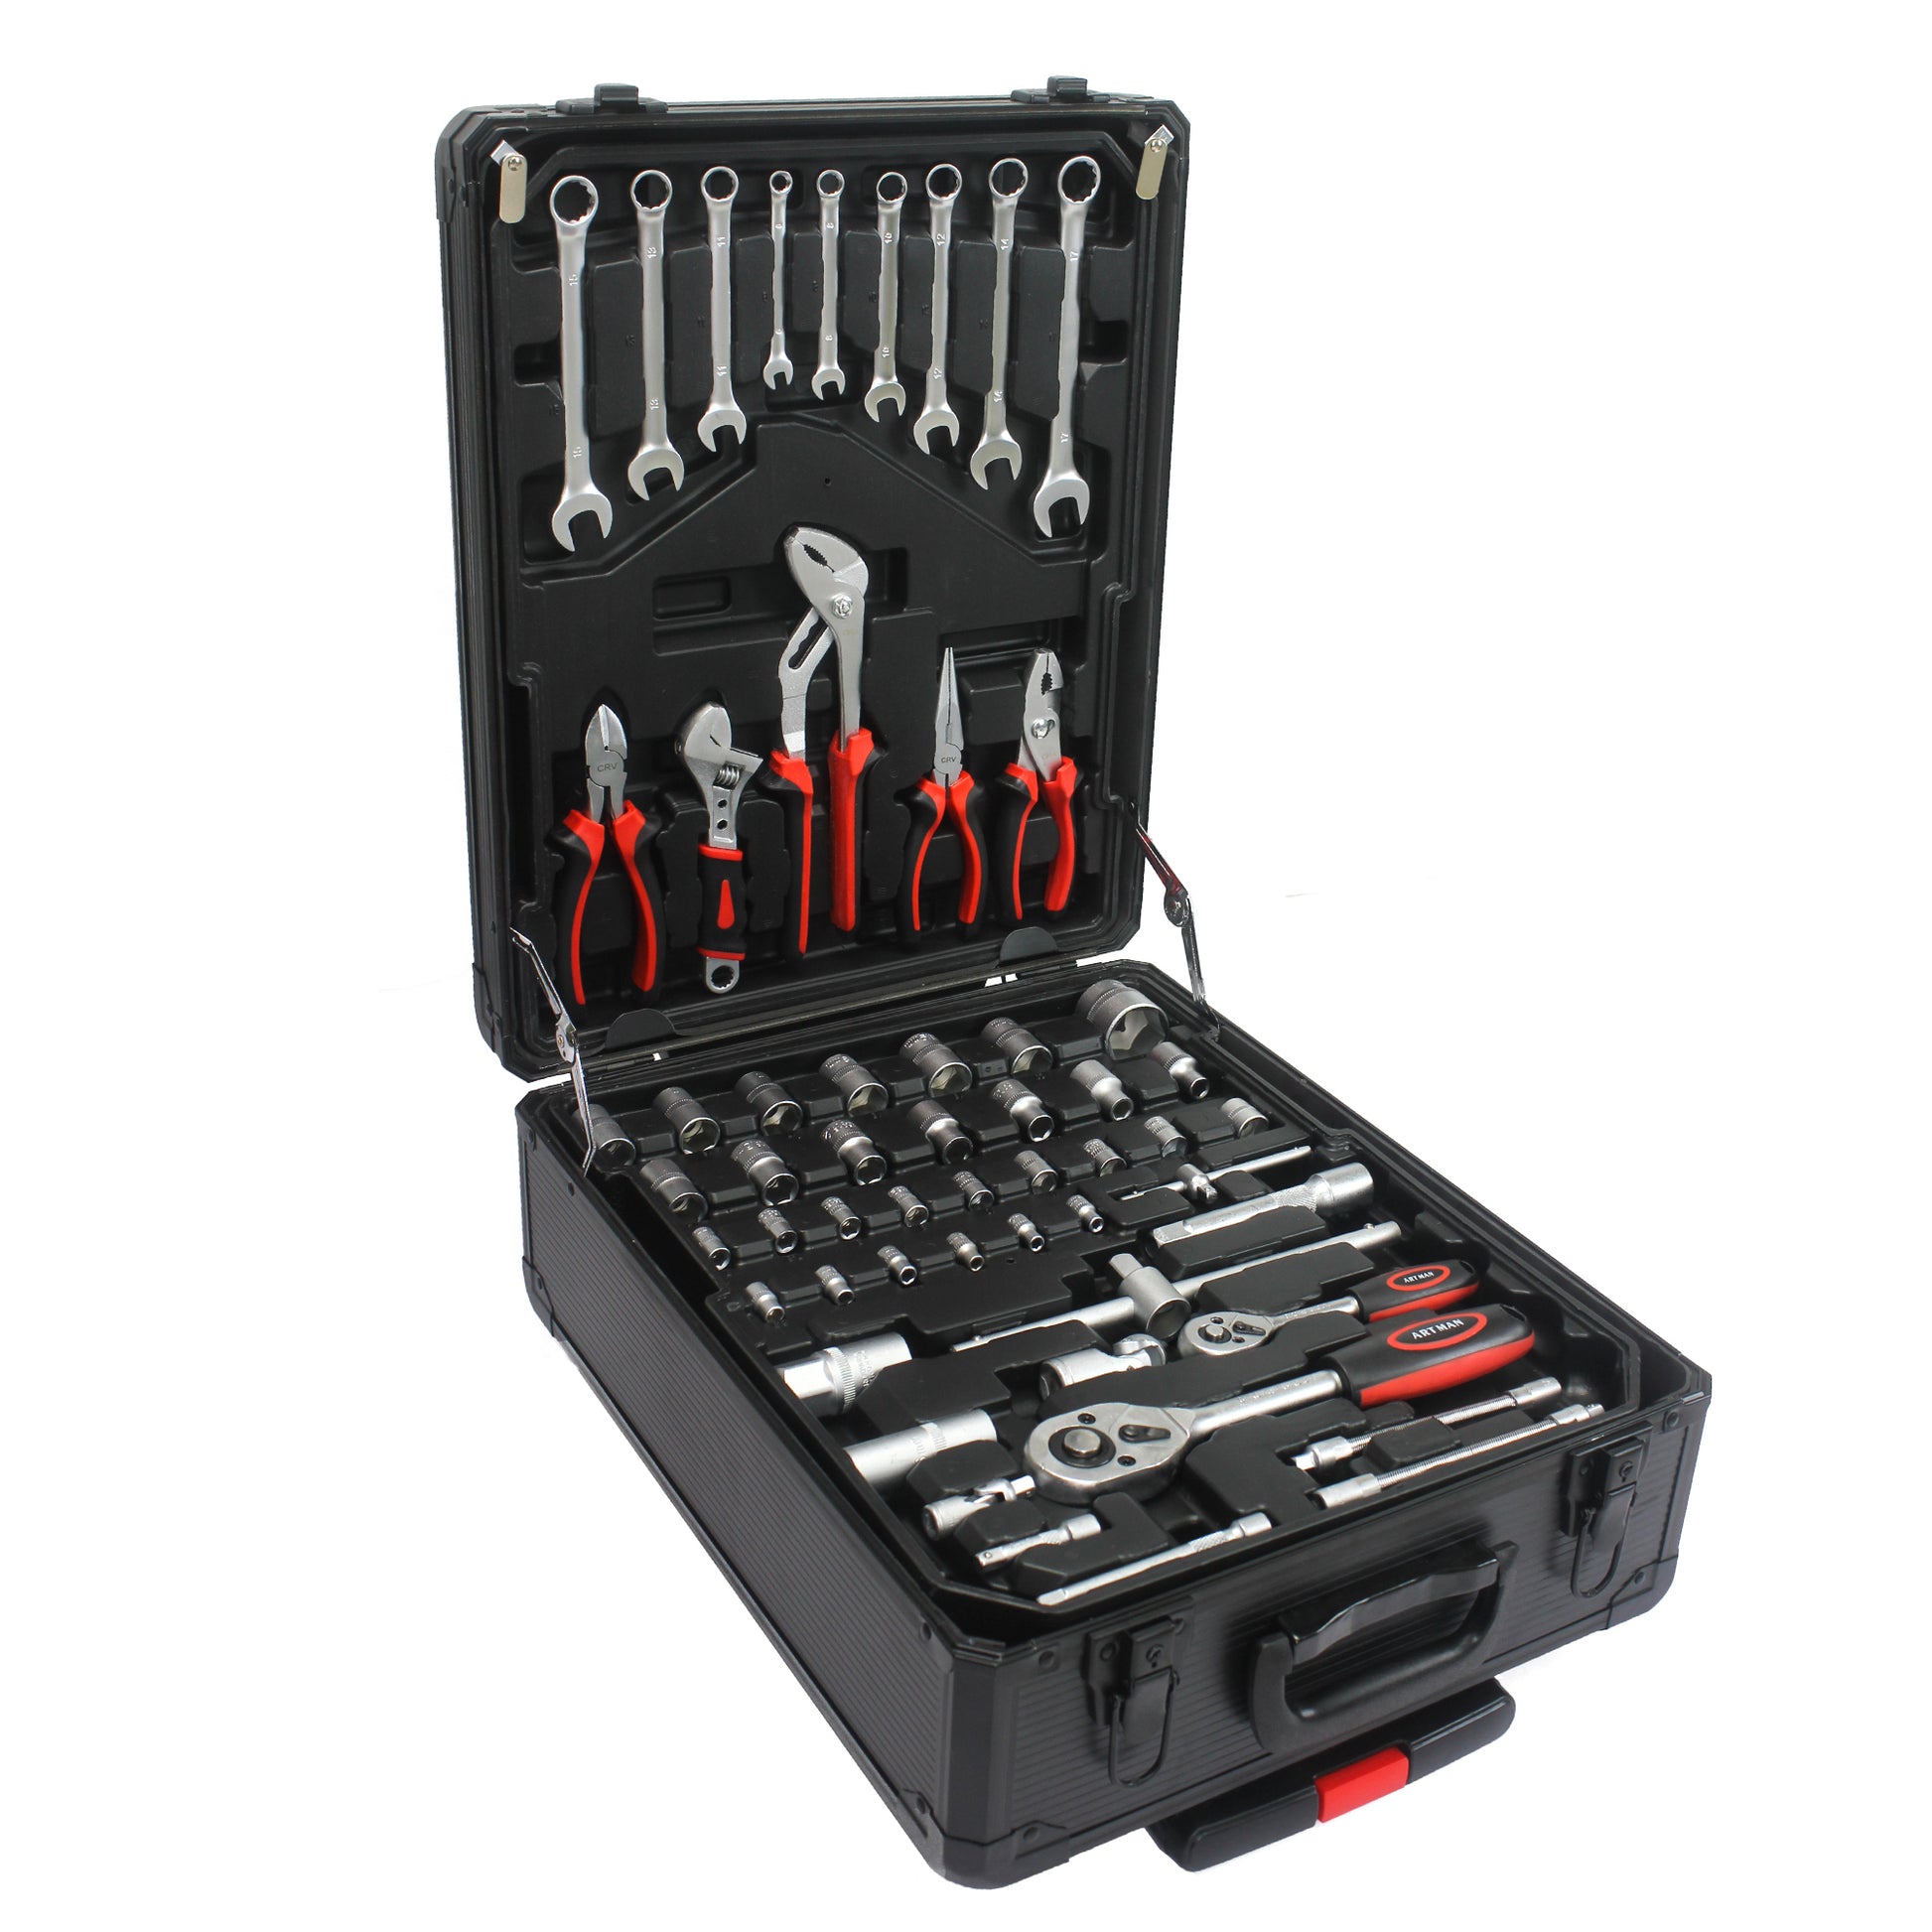 Black Hand Tool Box with 4 Layers of Toolset and black-plastic